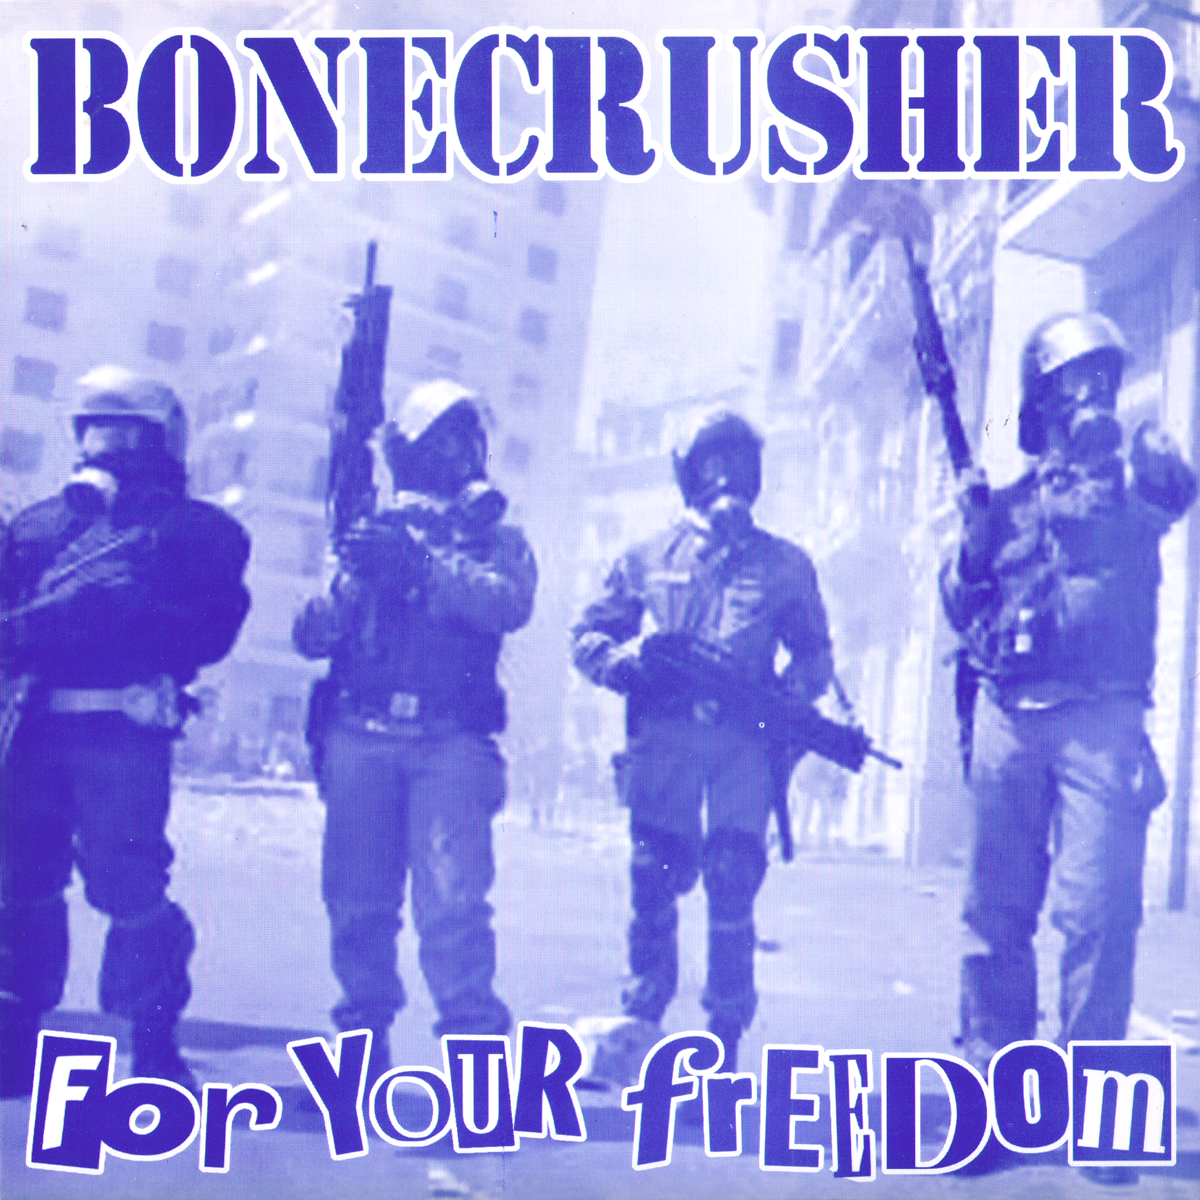 Bonecrusher- For Your Freedom 7" ~VERY RARE / LONG OUT OF PRINT!